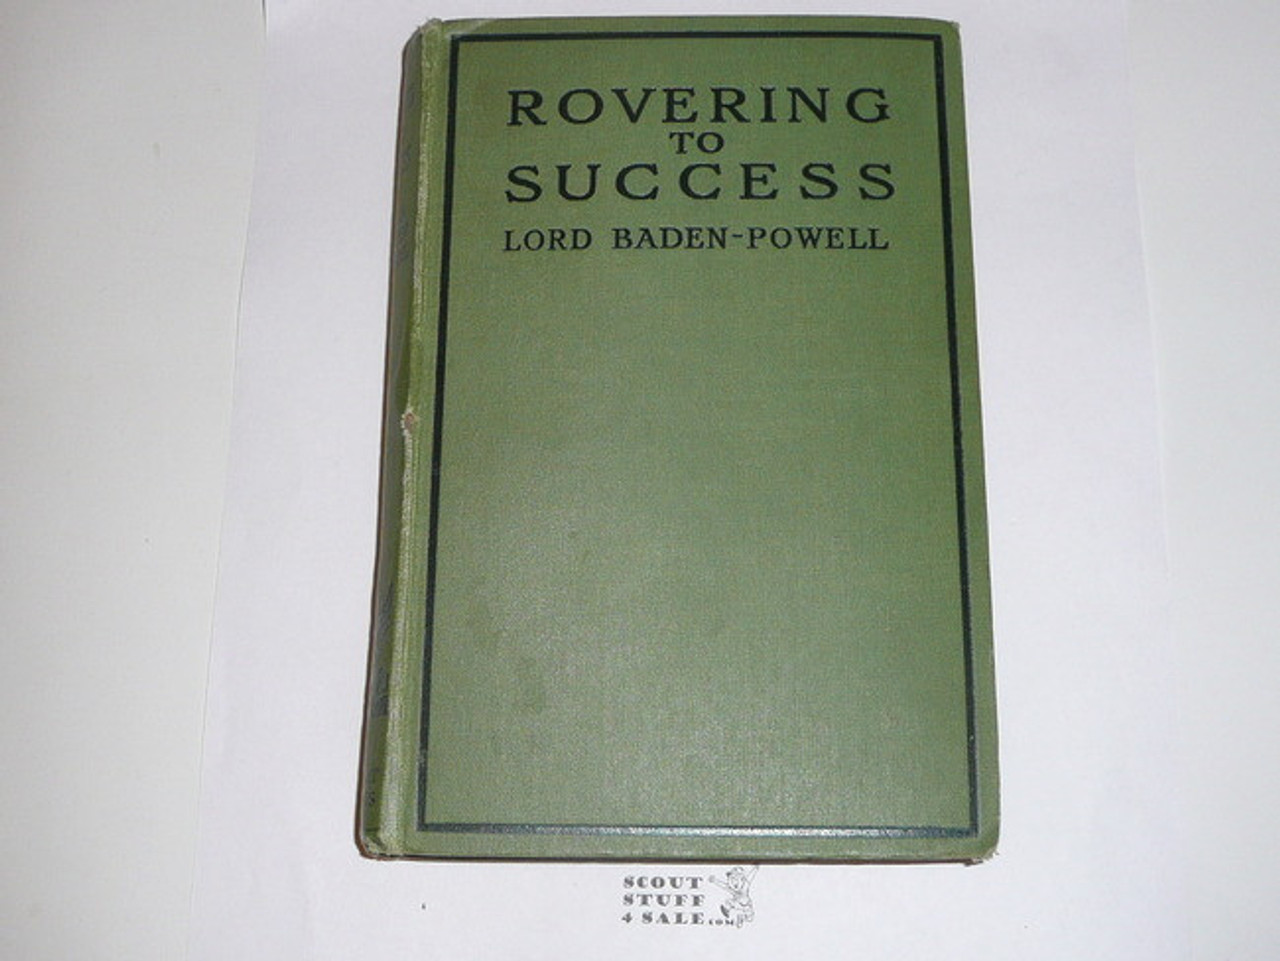 1930 Rovering to Success, By Lord Baden-Powell, Eleventh Printing